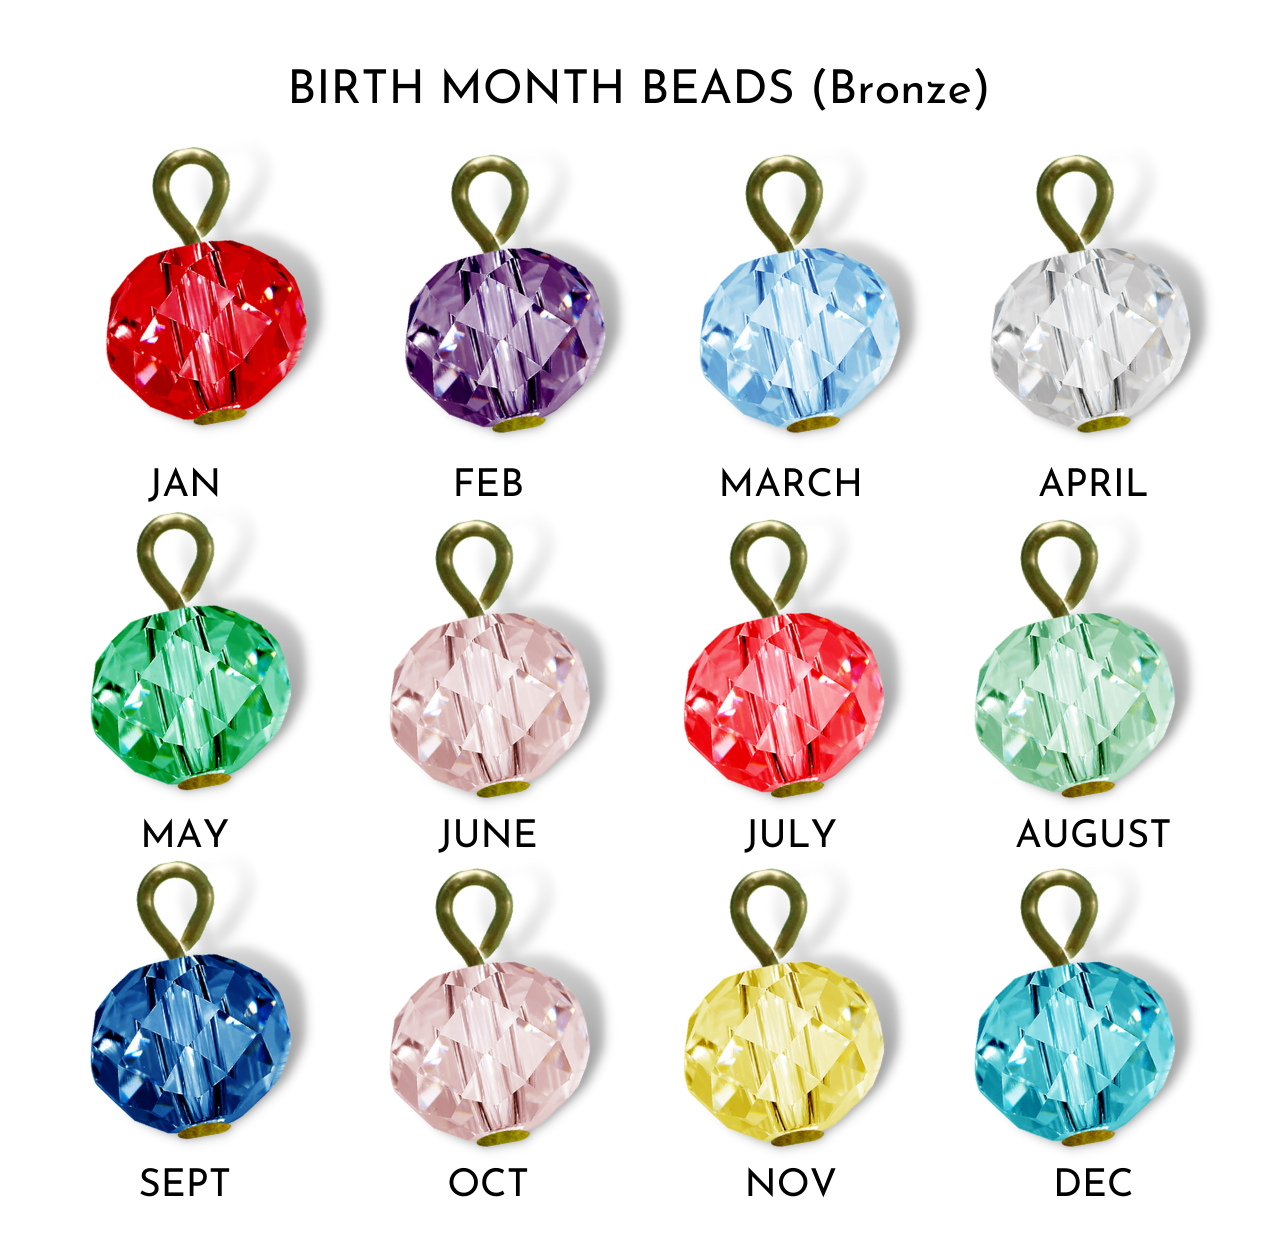 Add a Birth Month Bead To Your Jewelry - Gutsy Goodness